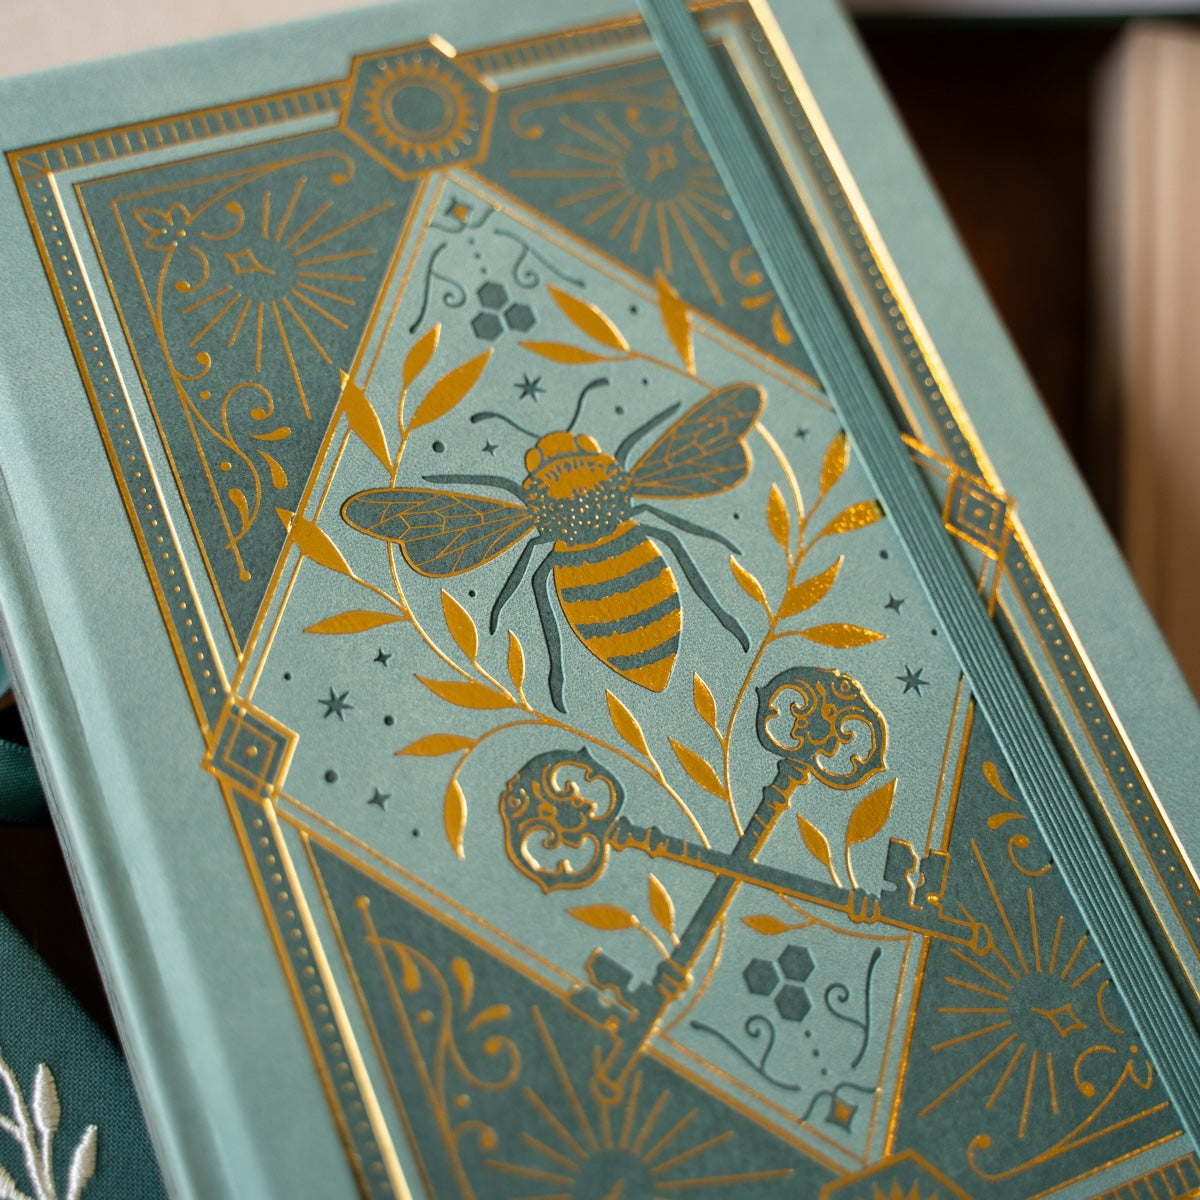 Keeper of Bees Notebook